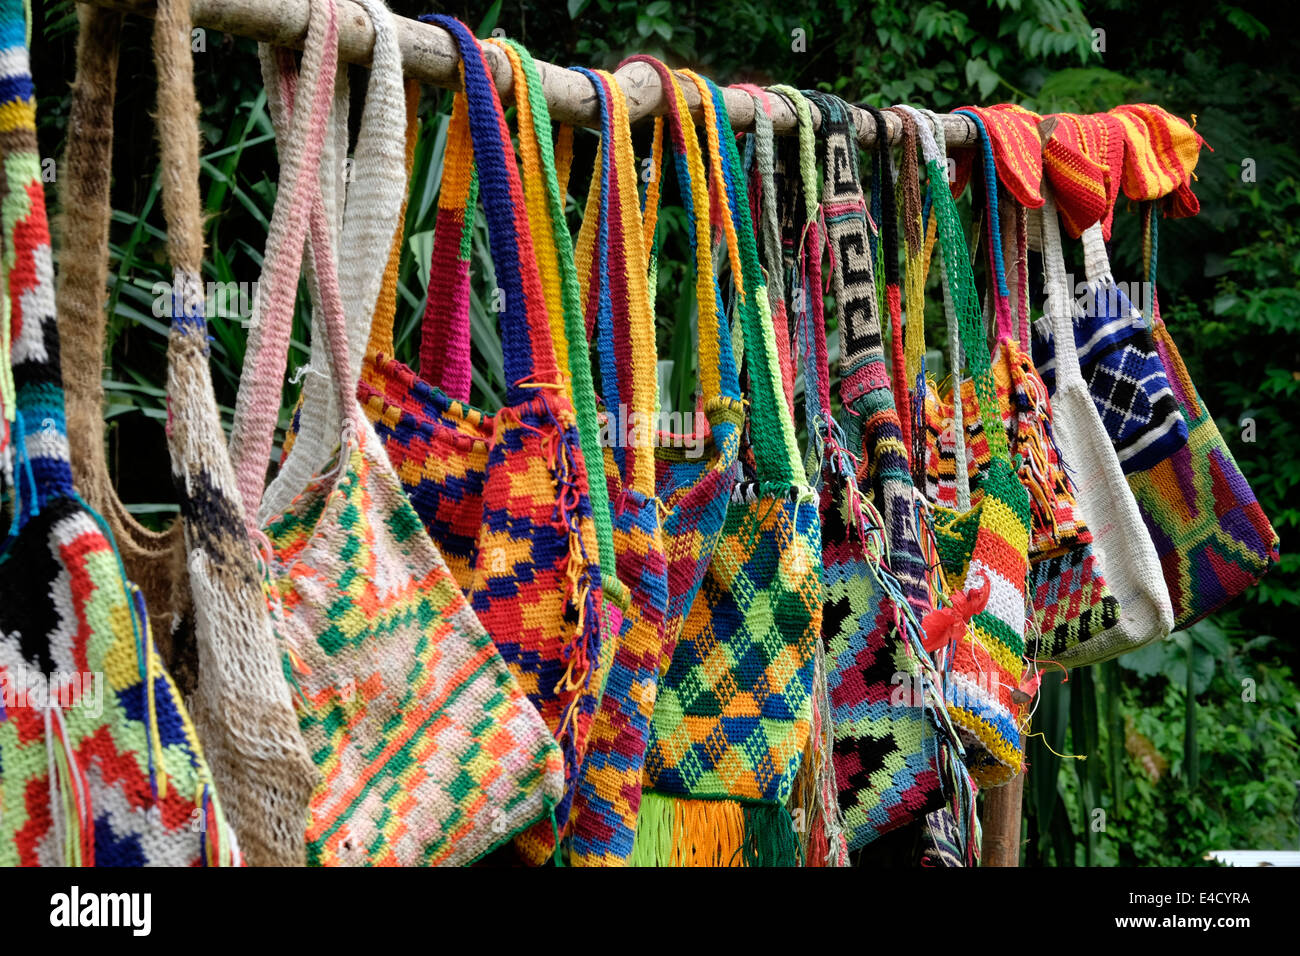 A selection of colourful hand made bags called bilums on display in Papua New Guinea Stock Photo